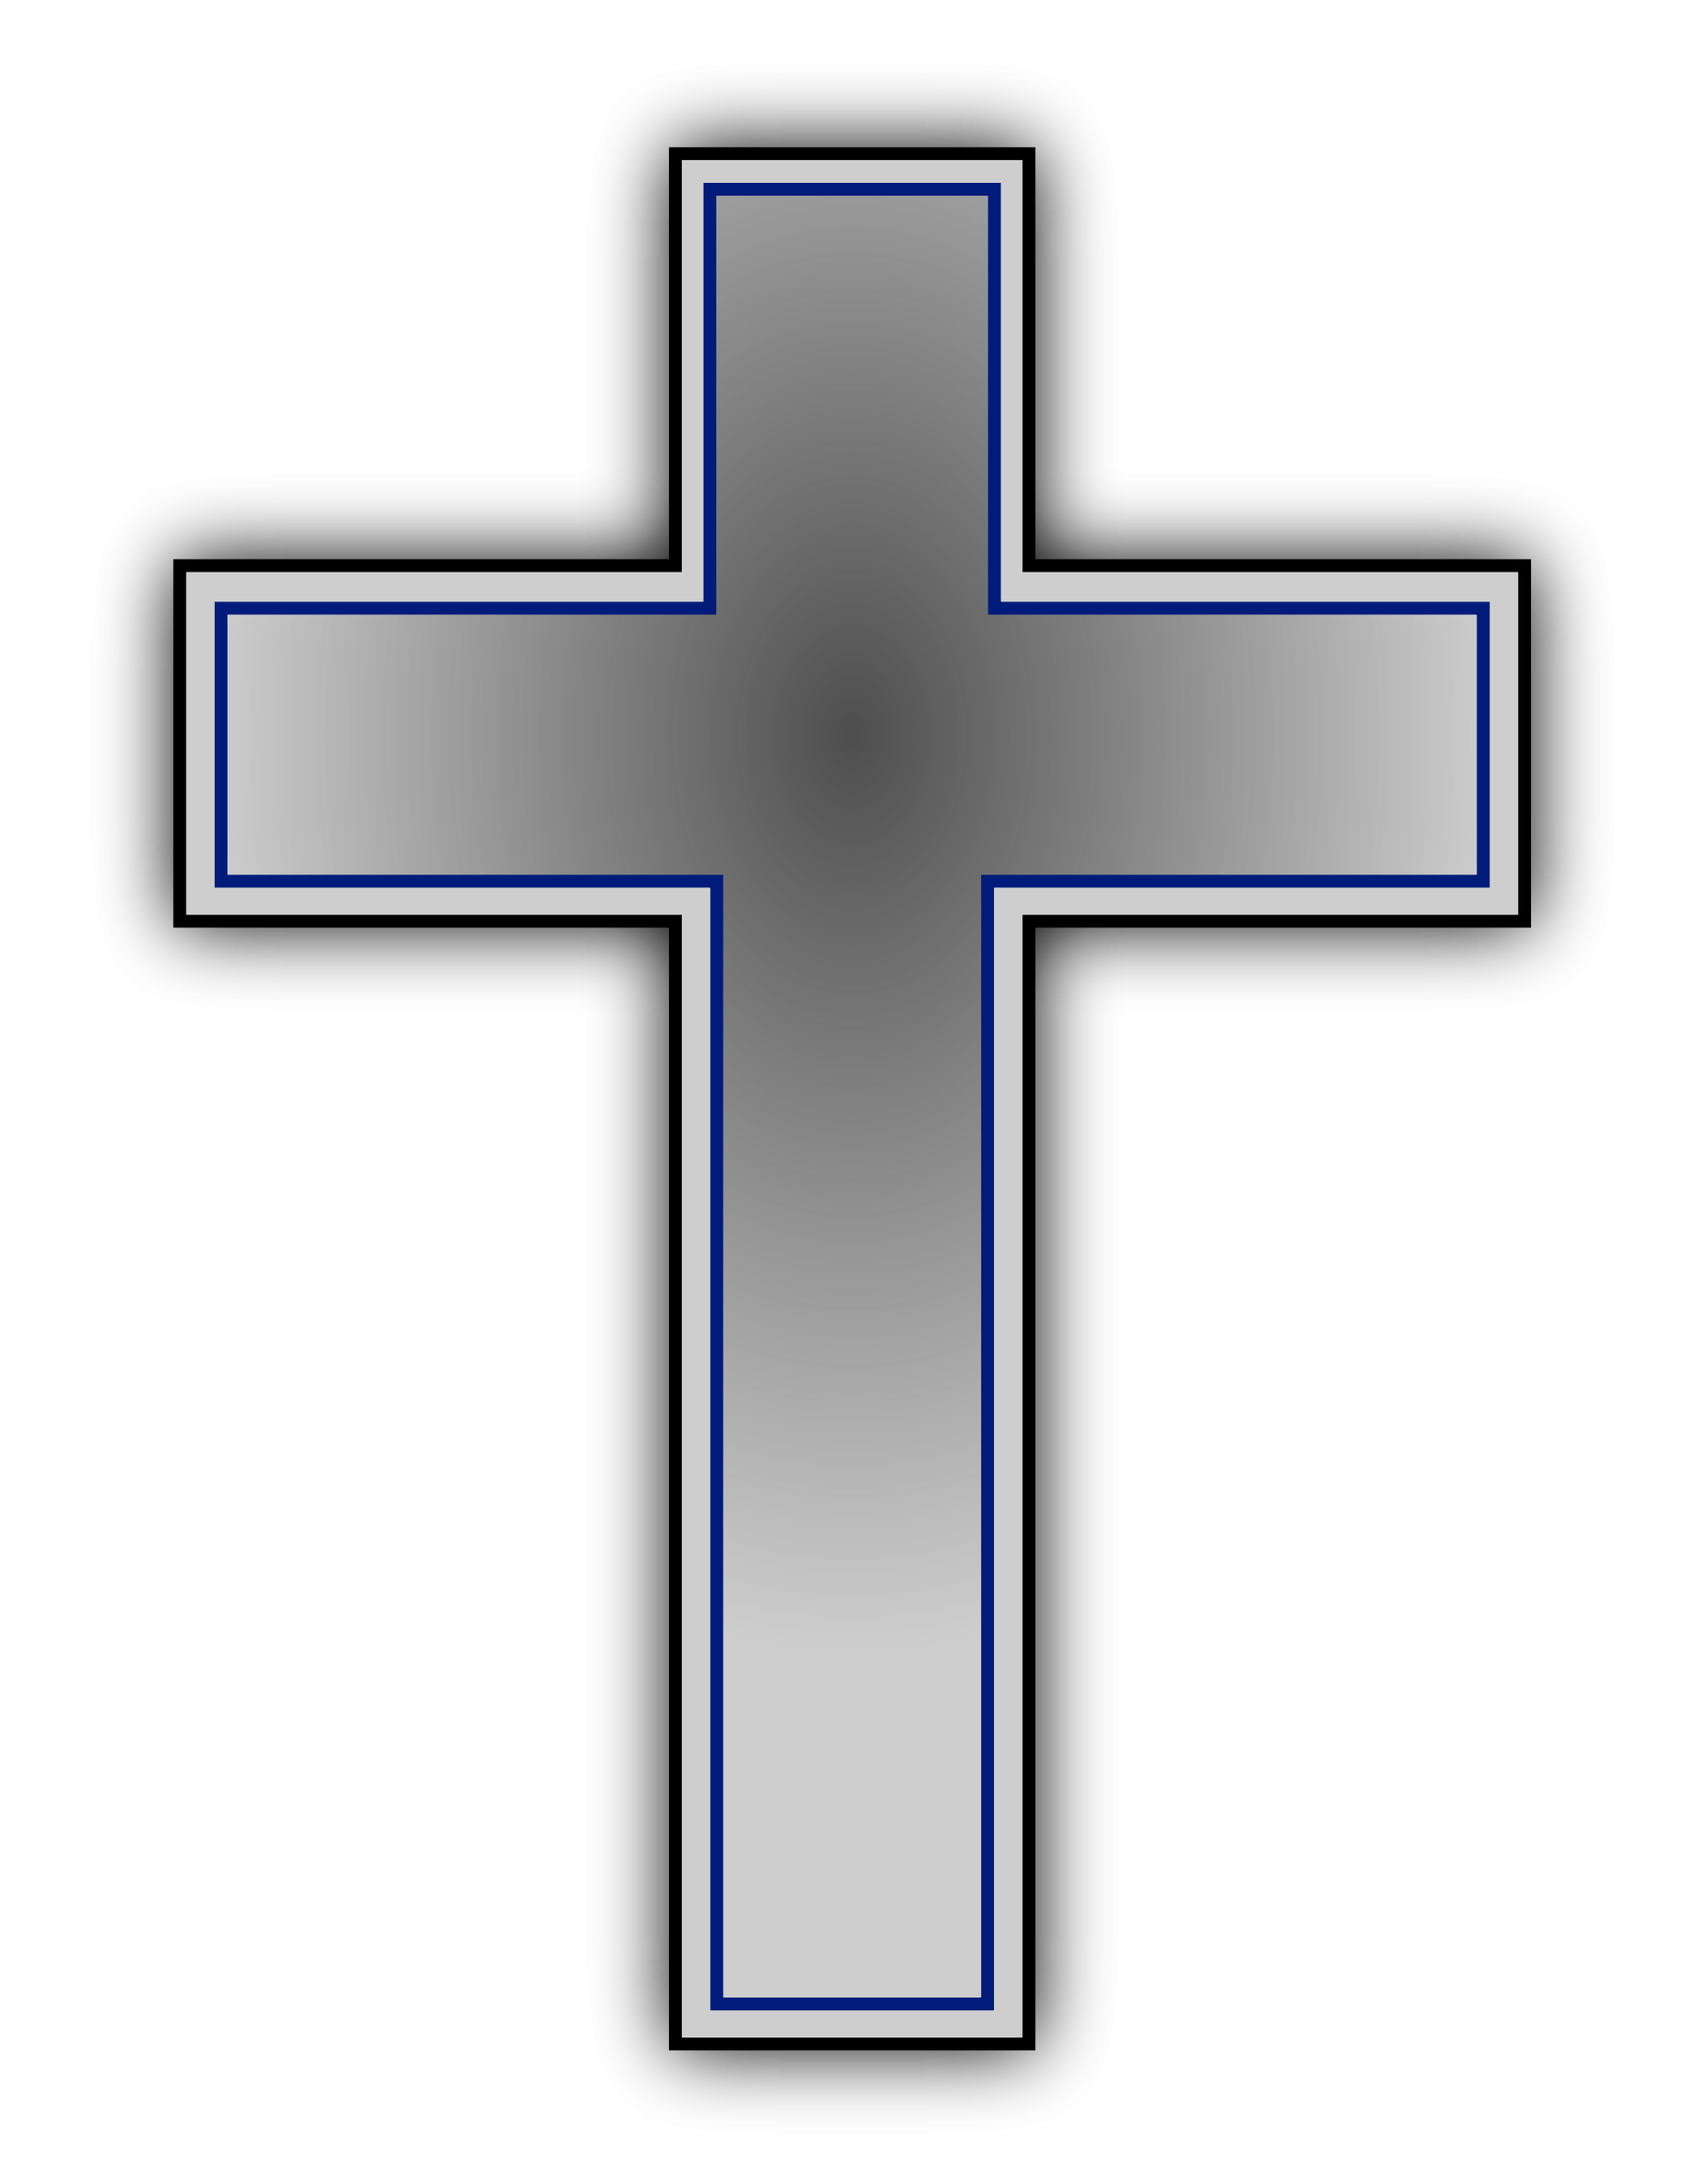 Catholic drawing at getdrawings. Cross clipart religion